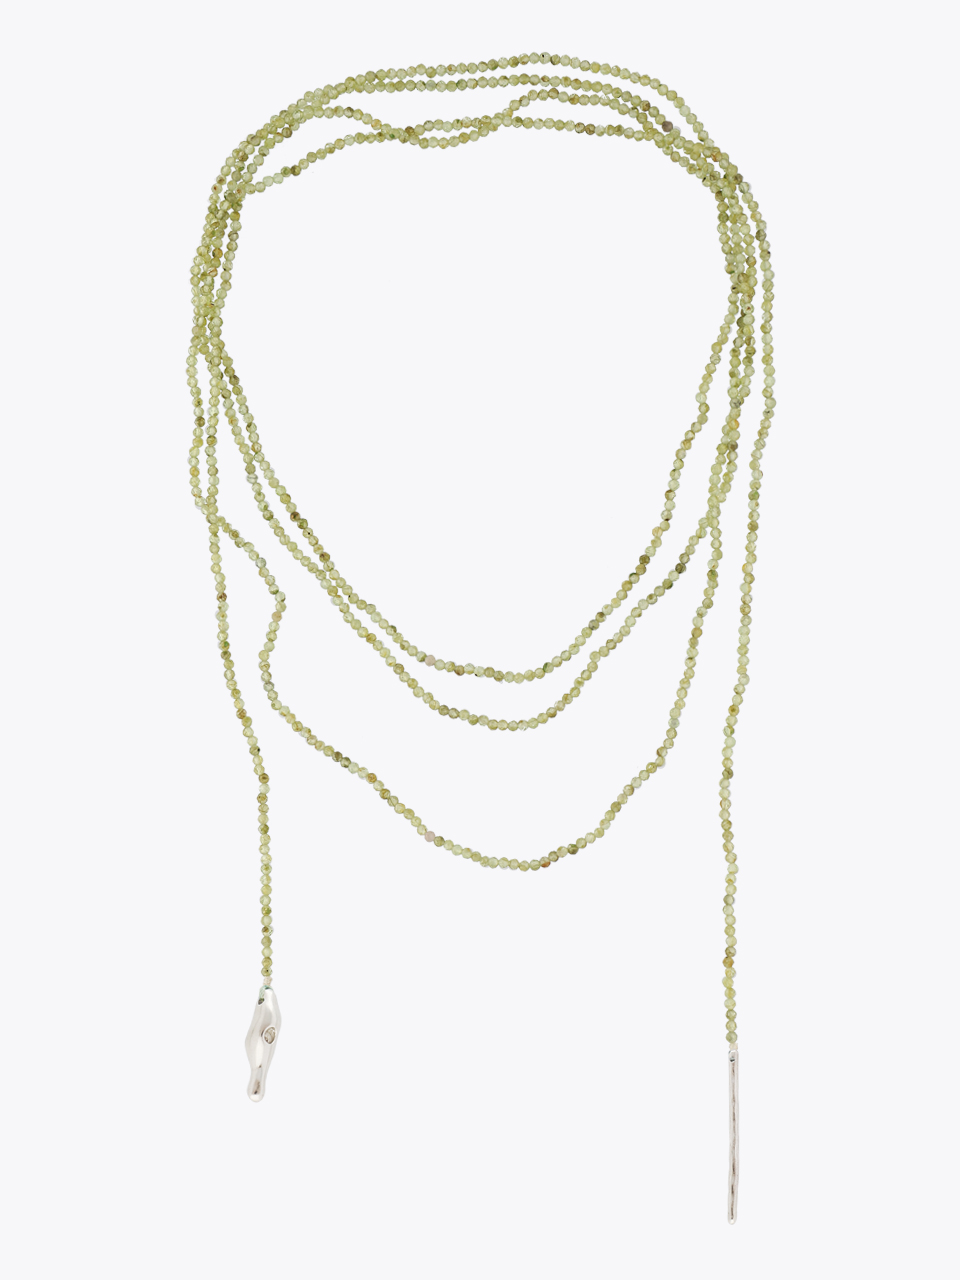 Stone scarf necklace - Green